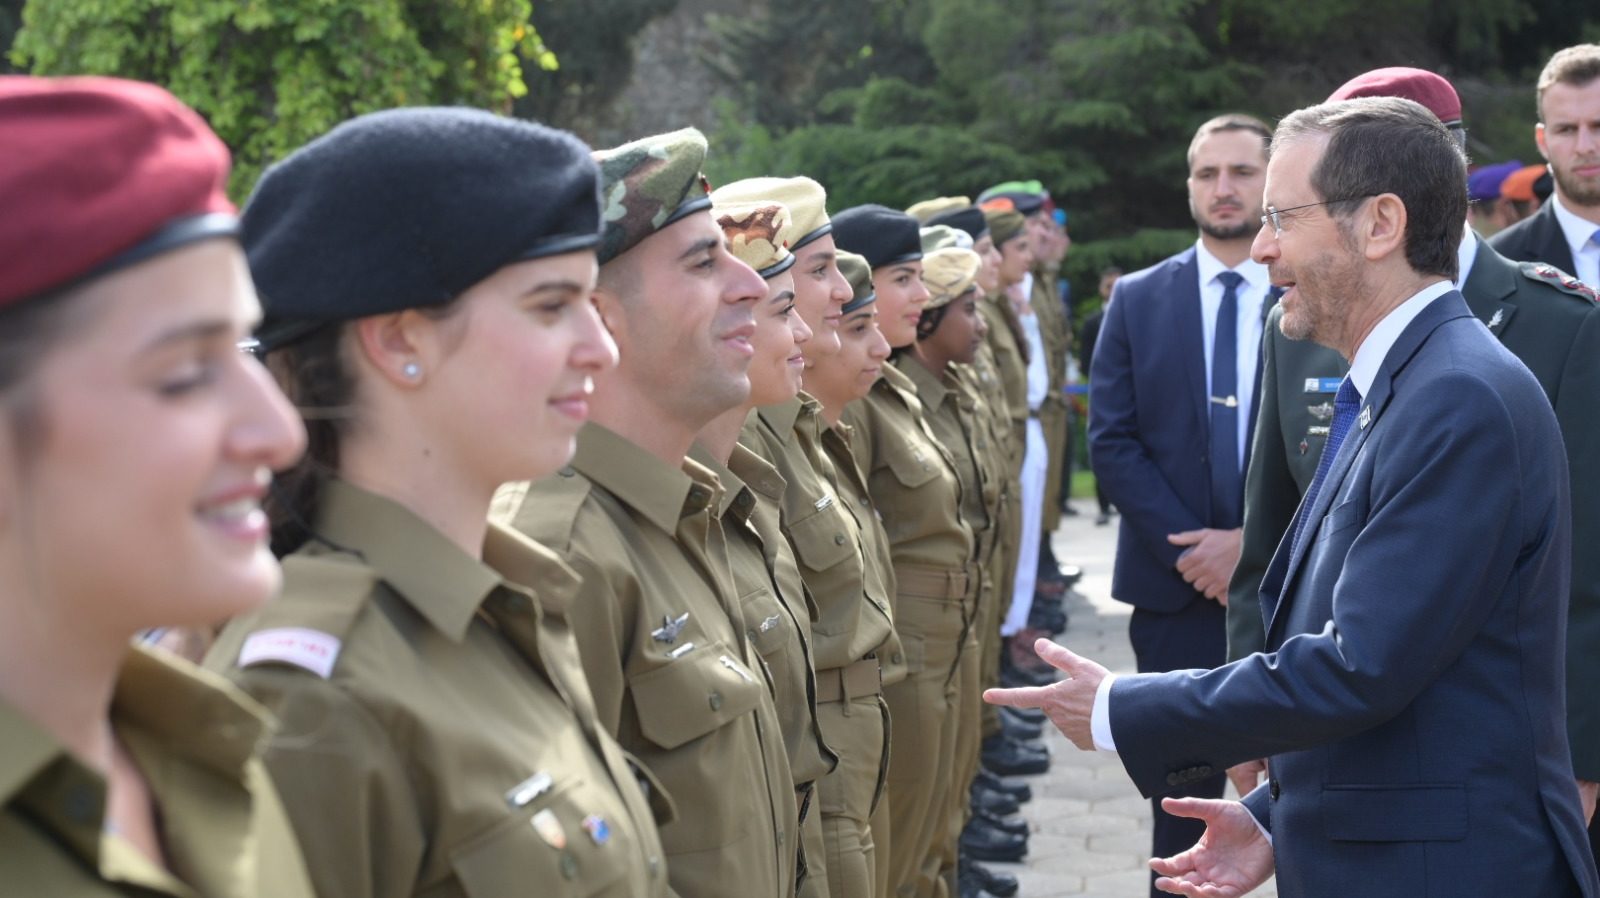 Israel’s President Hosts 120 Distinguished Soldiers For Independence Day